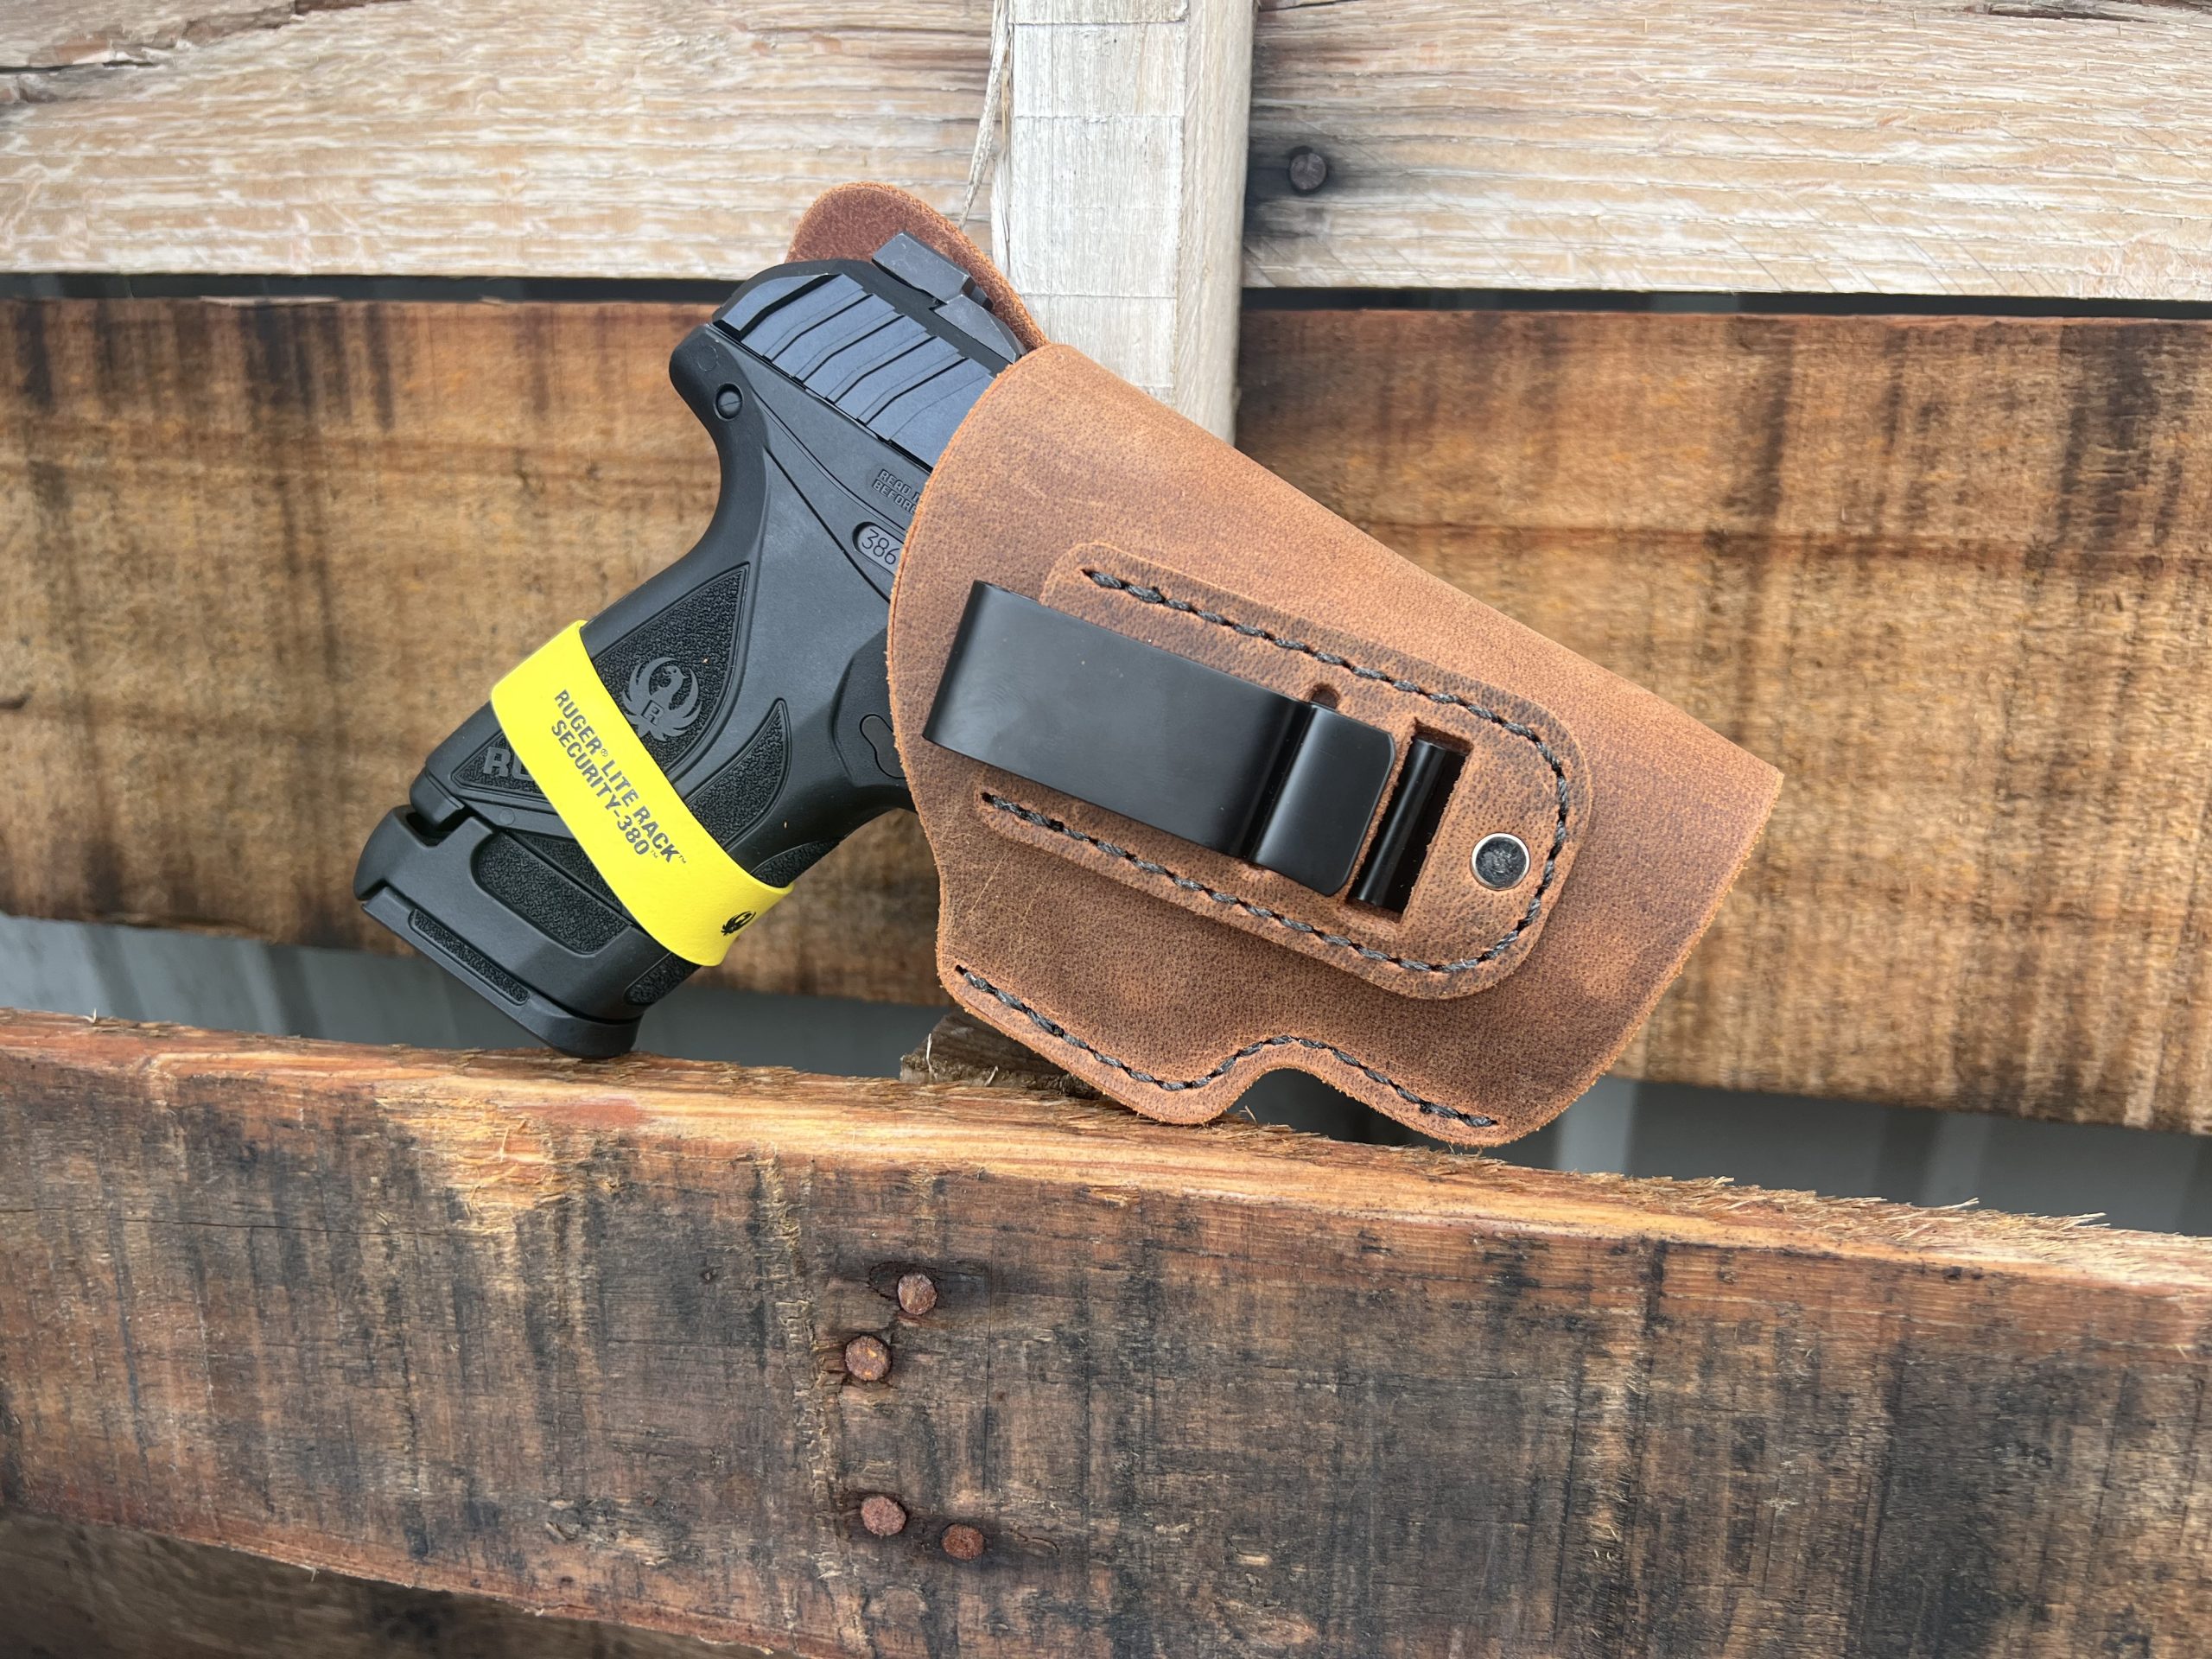 Lcp Ruger 380 Holster - 380 Holster Kydex Iwb Concealed Carry